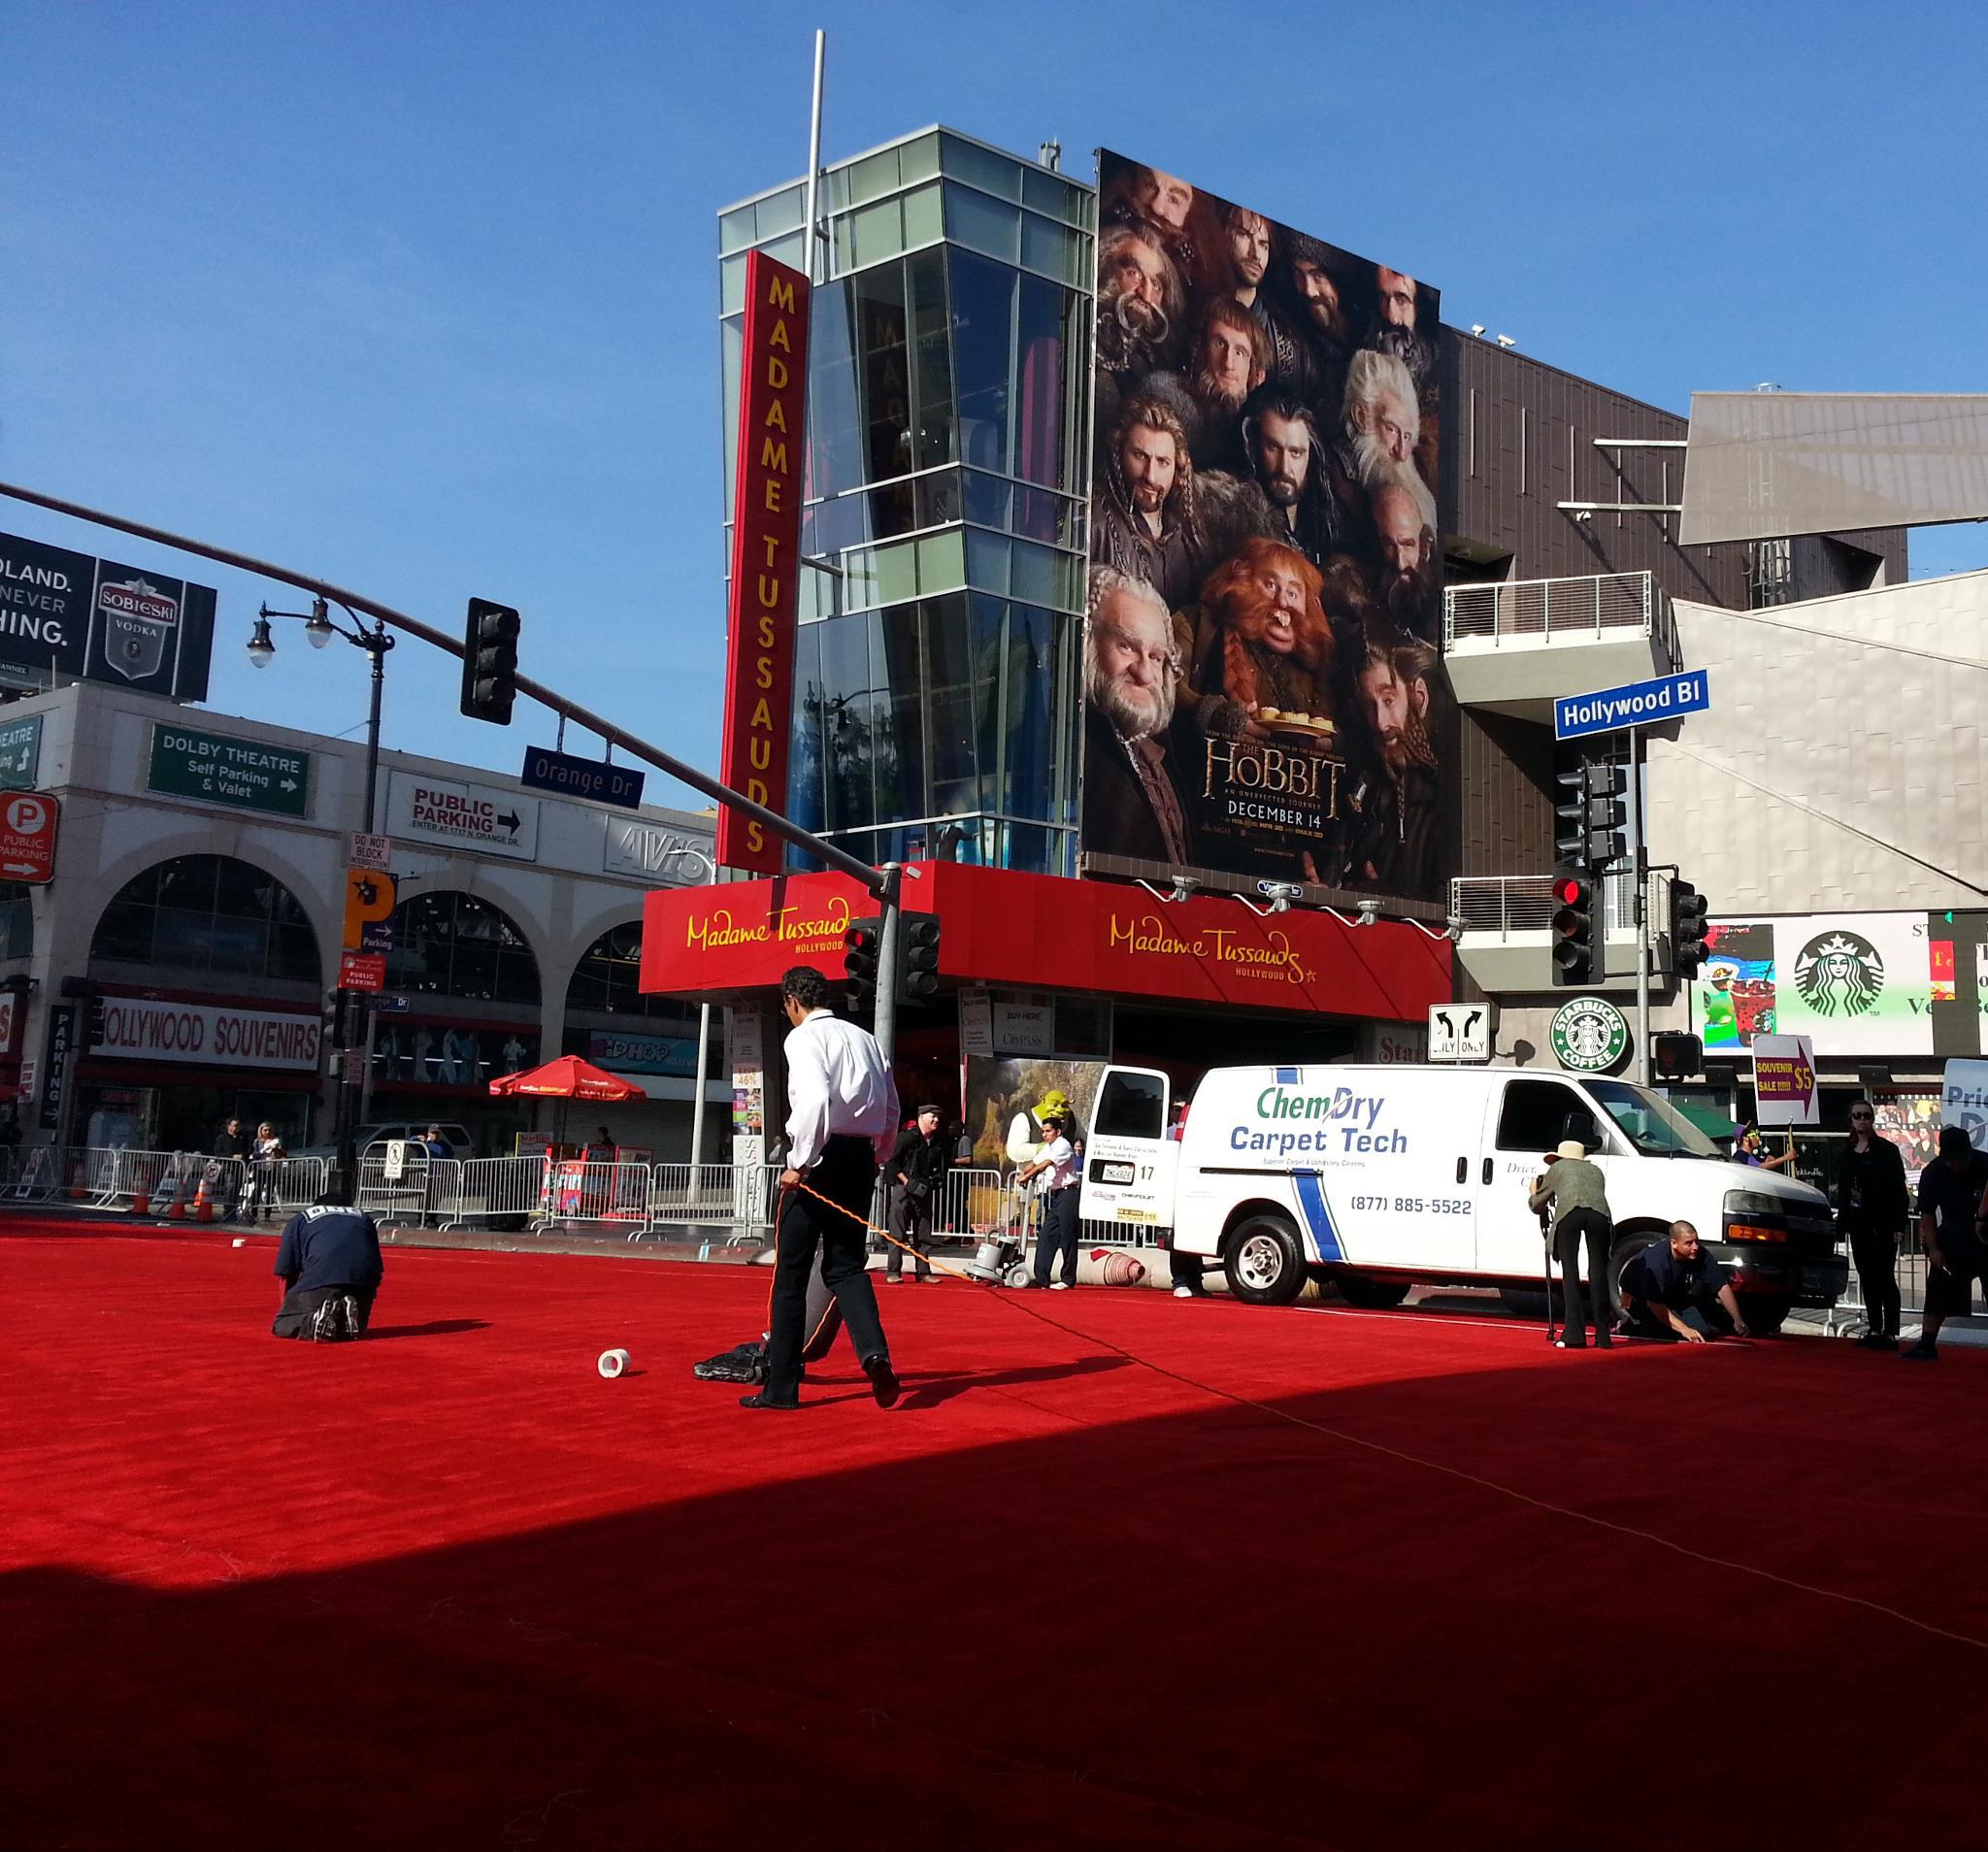 Chem-Dry Carpet Tech cleaning the red carpet in Los Angeles